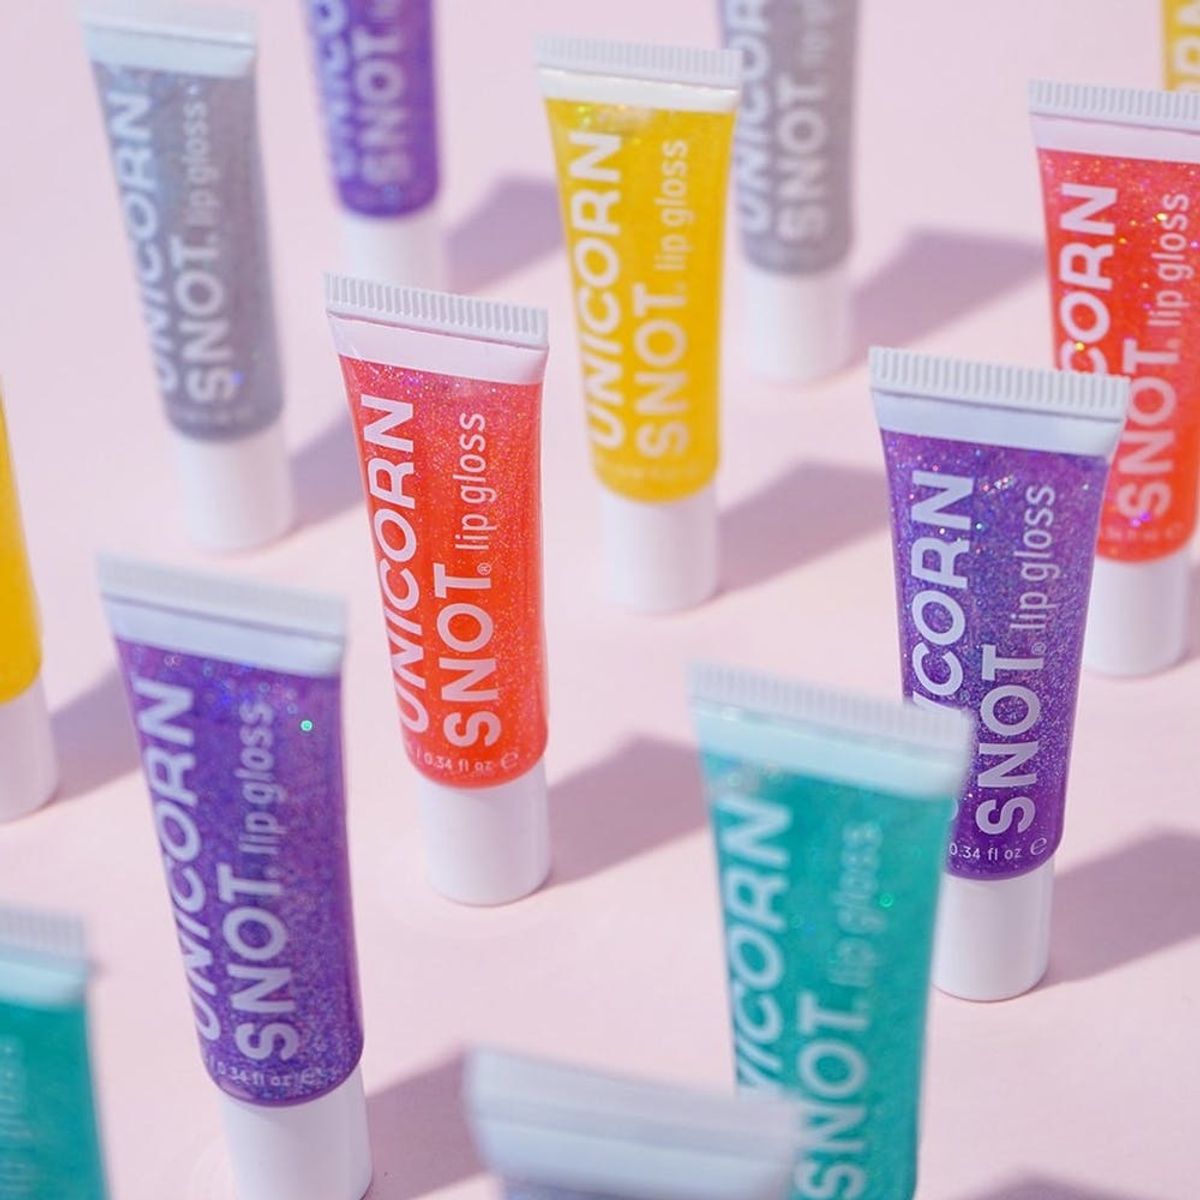 Unicorn Snot Lip Gloss Is an Actual Beauty Product You Can Buy